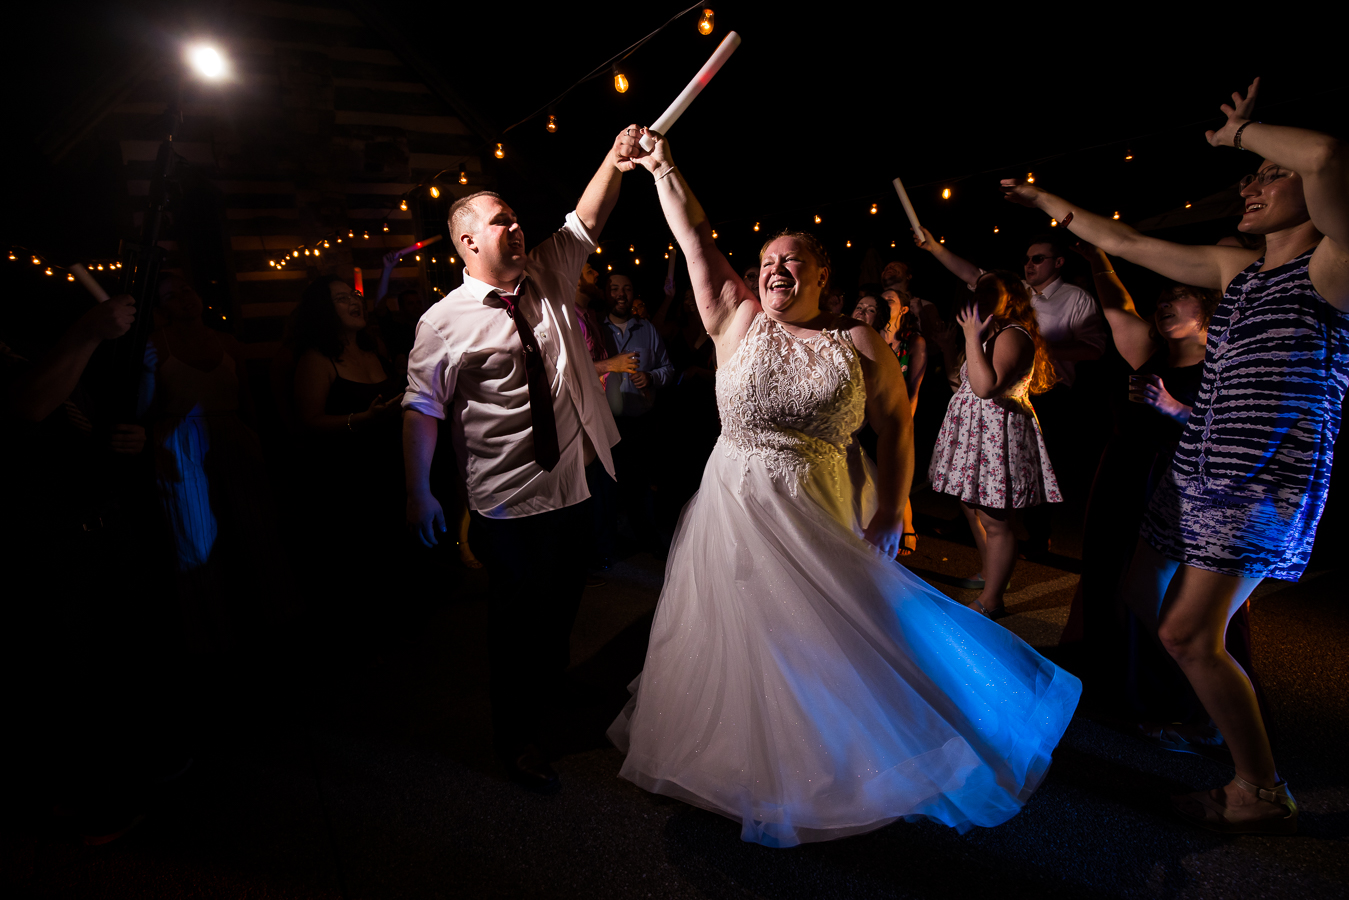 Oak Lodge Wedding Photographer, rhinehart photography, captures this fun end of the night shot of the bride and the groom as they dance together with the giant glowsticks with their families and friends surrounding them 